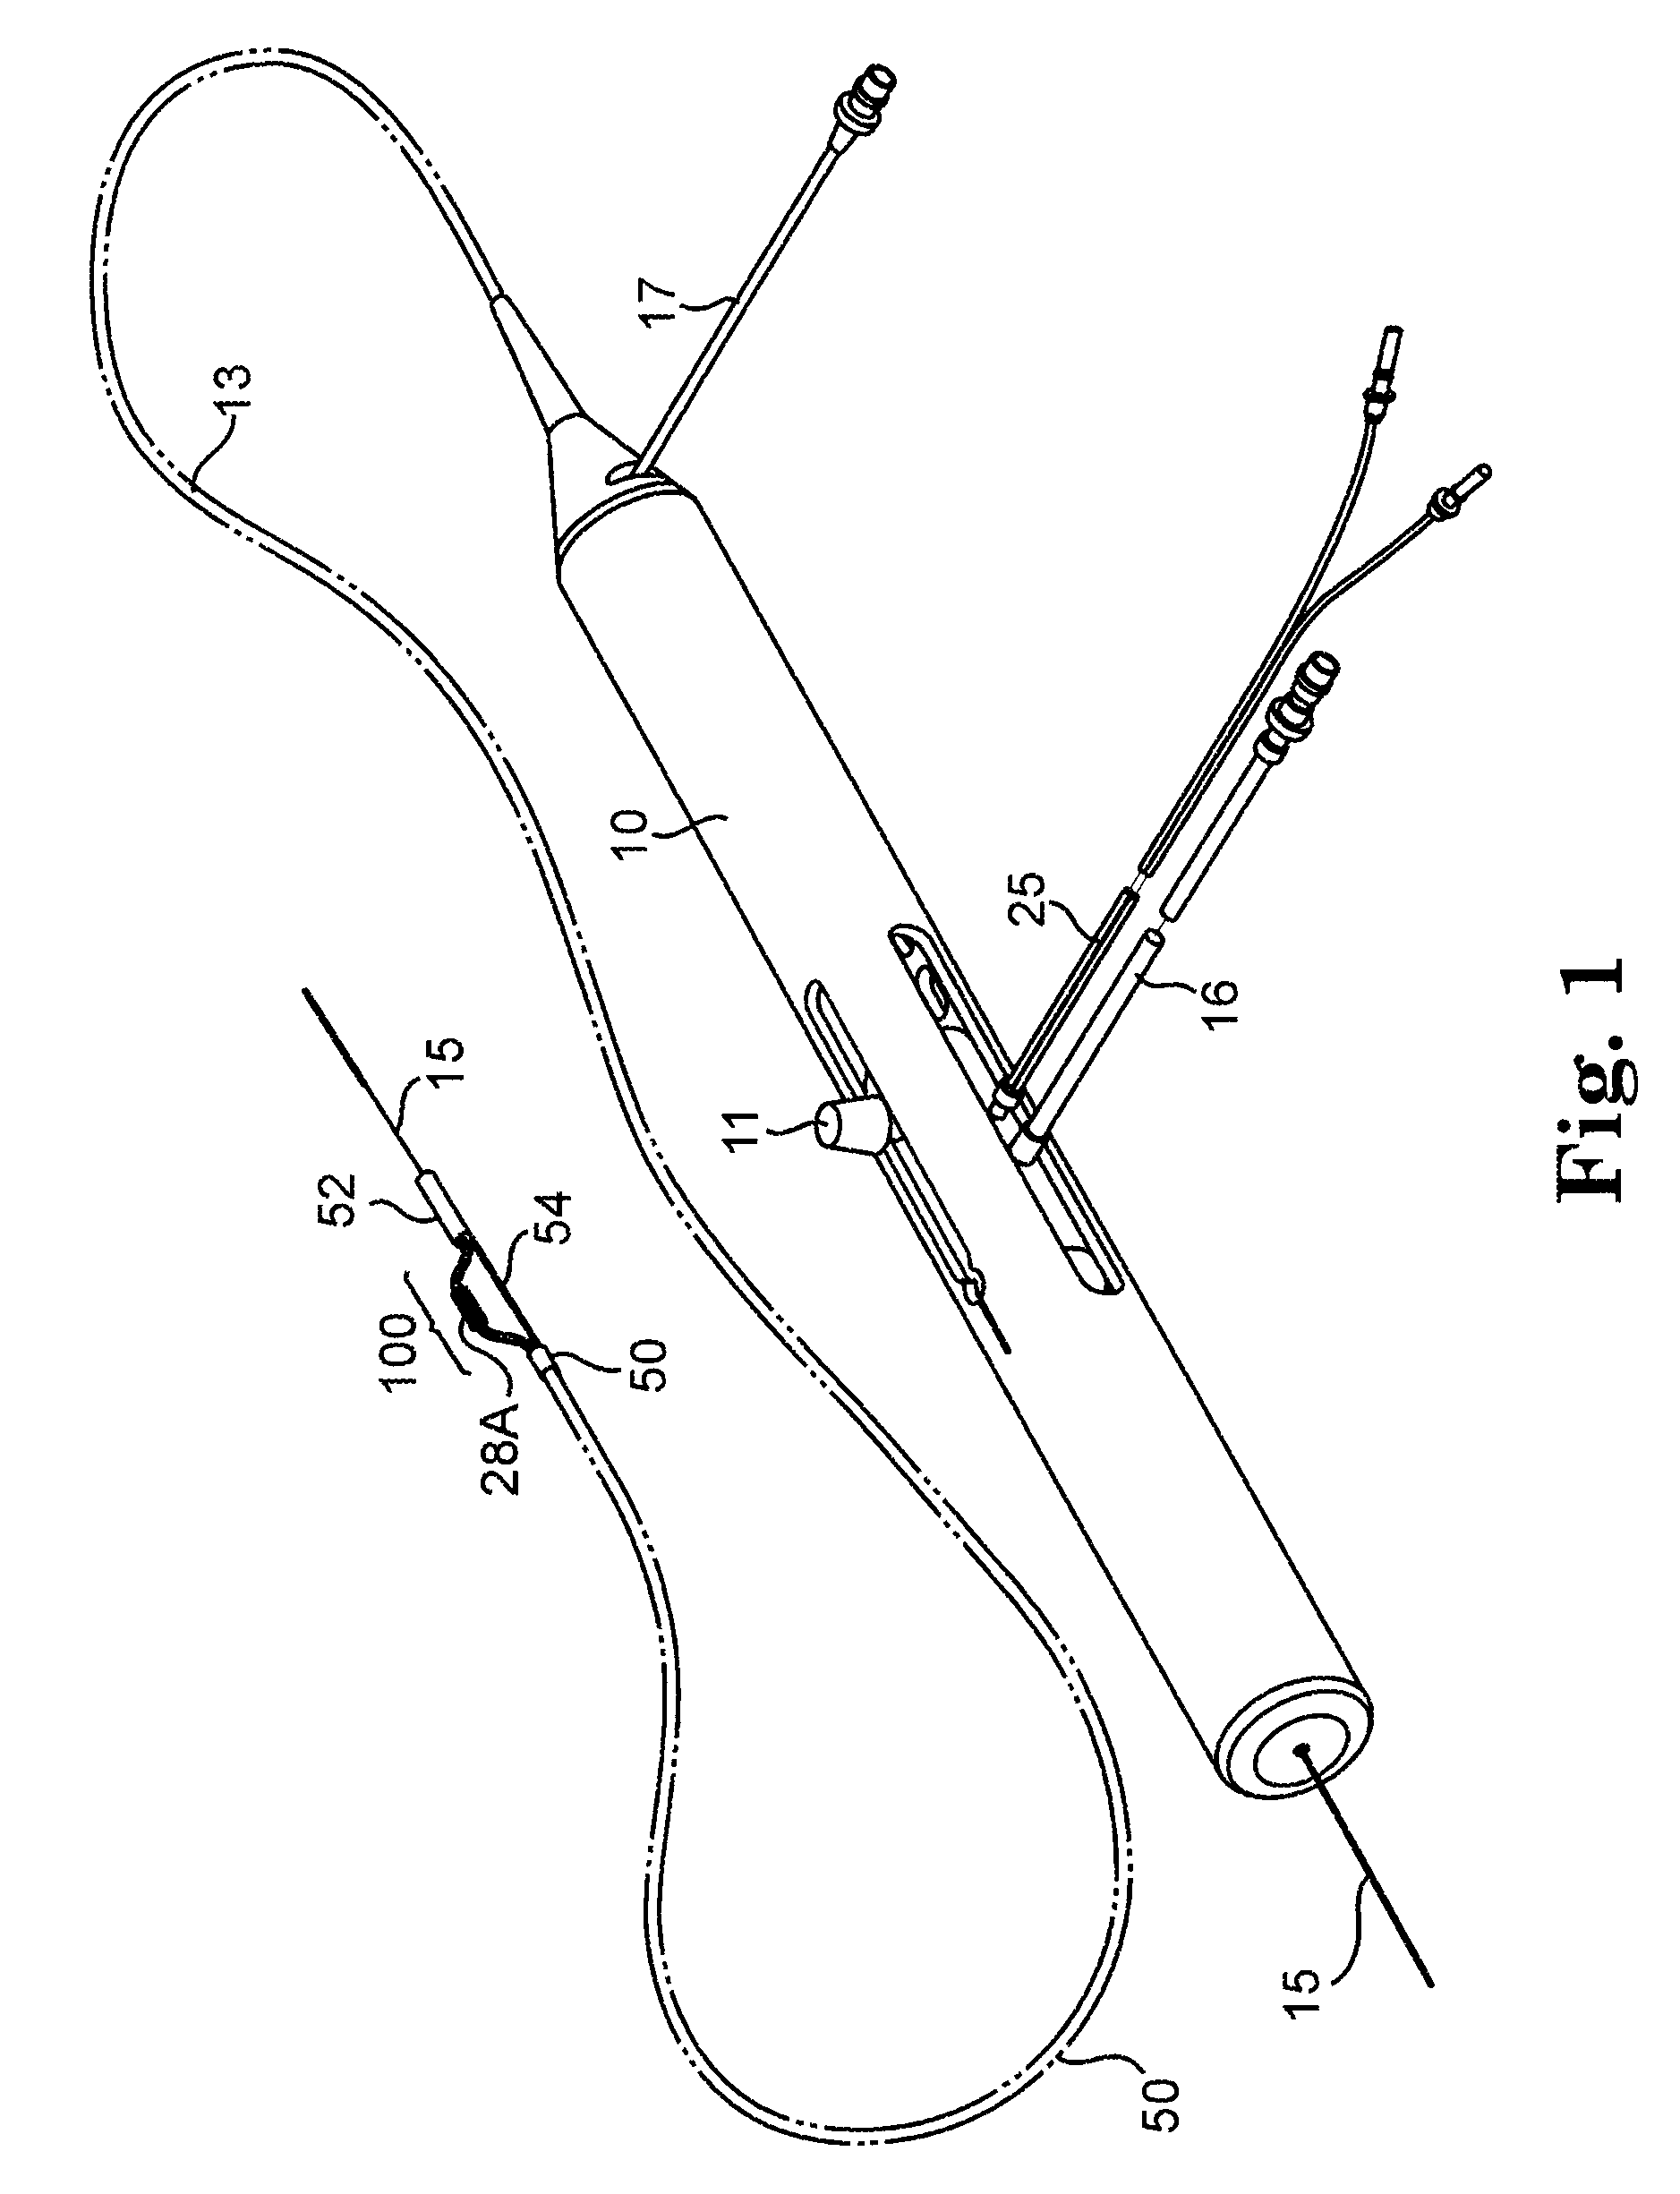 Directional rotational atherectomy device with offset spinning abrasive element